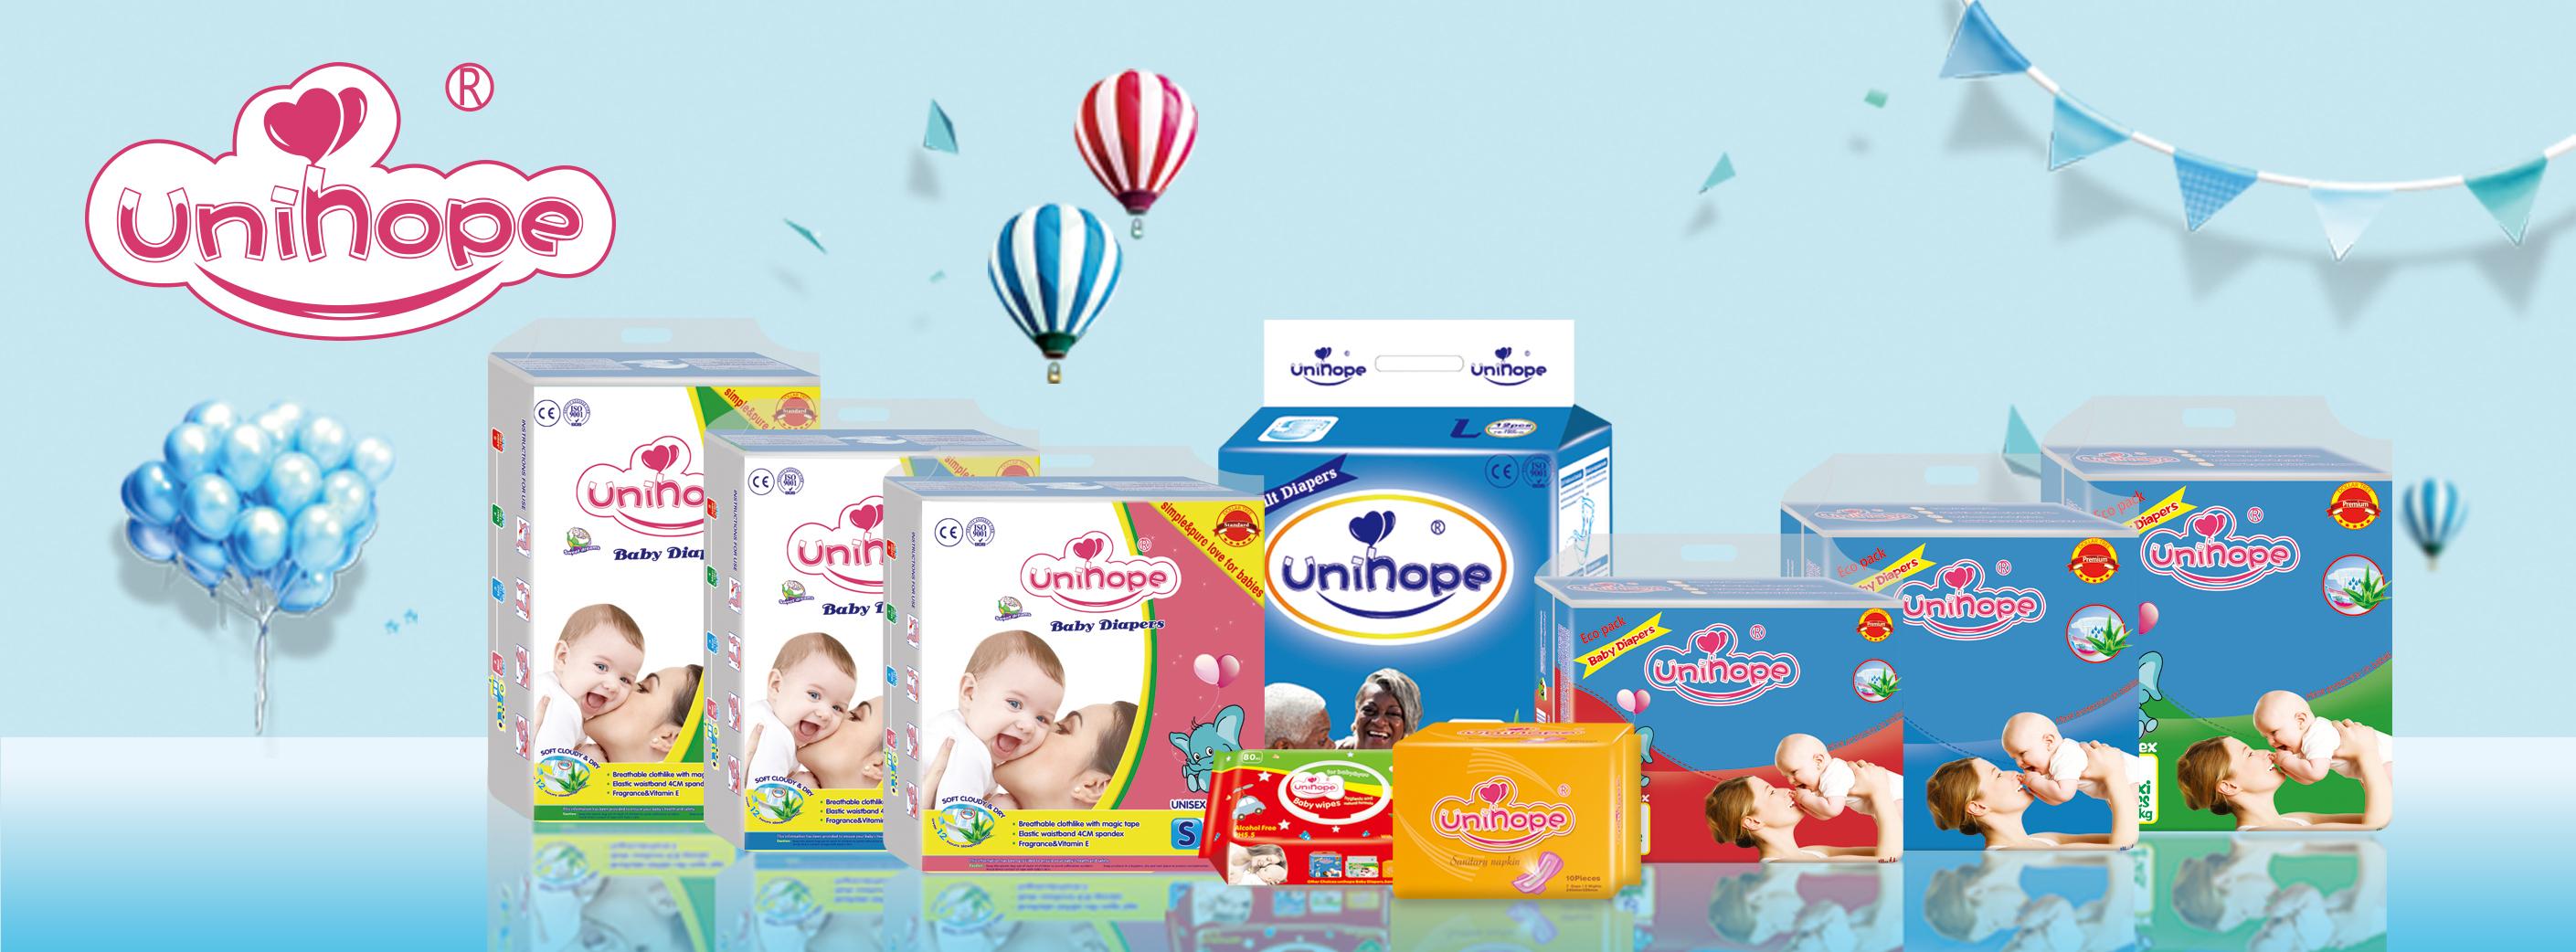 Great water absorption wholesale price Disposable baby diapers in stock